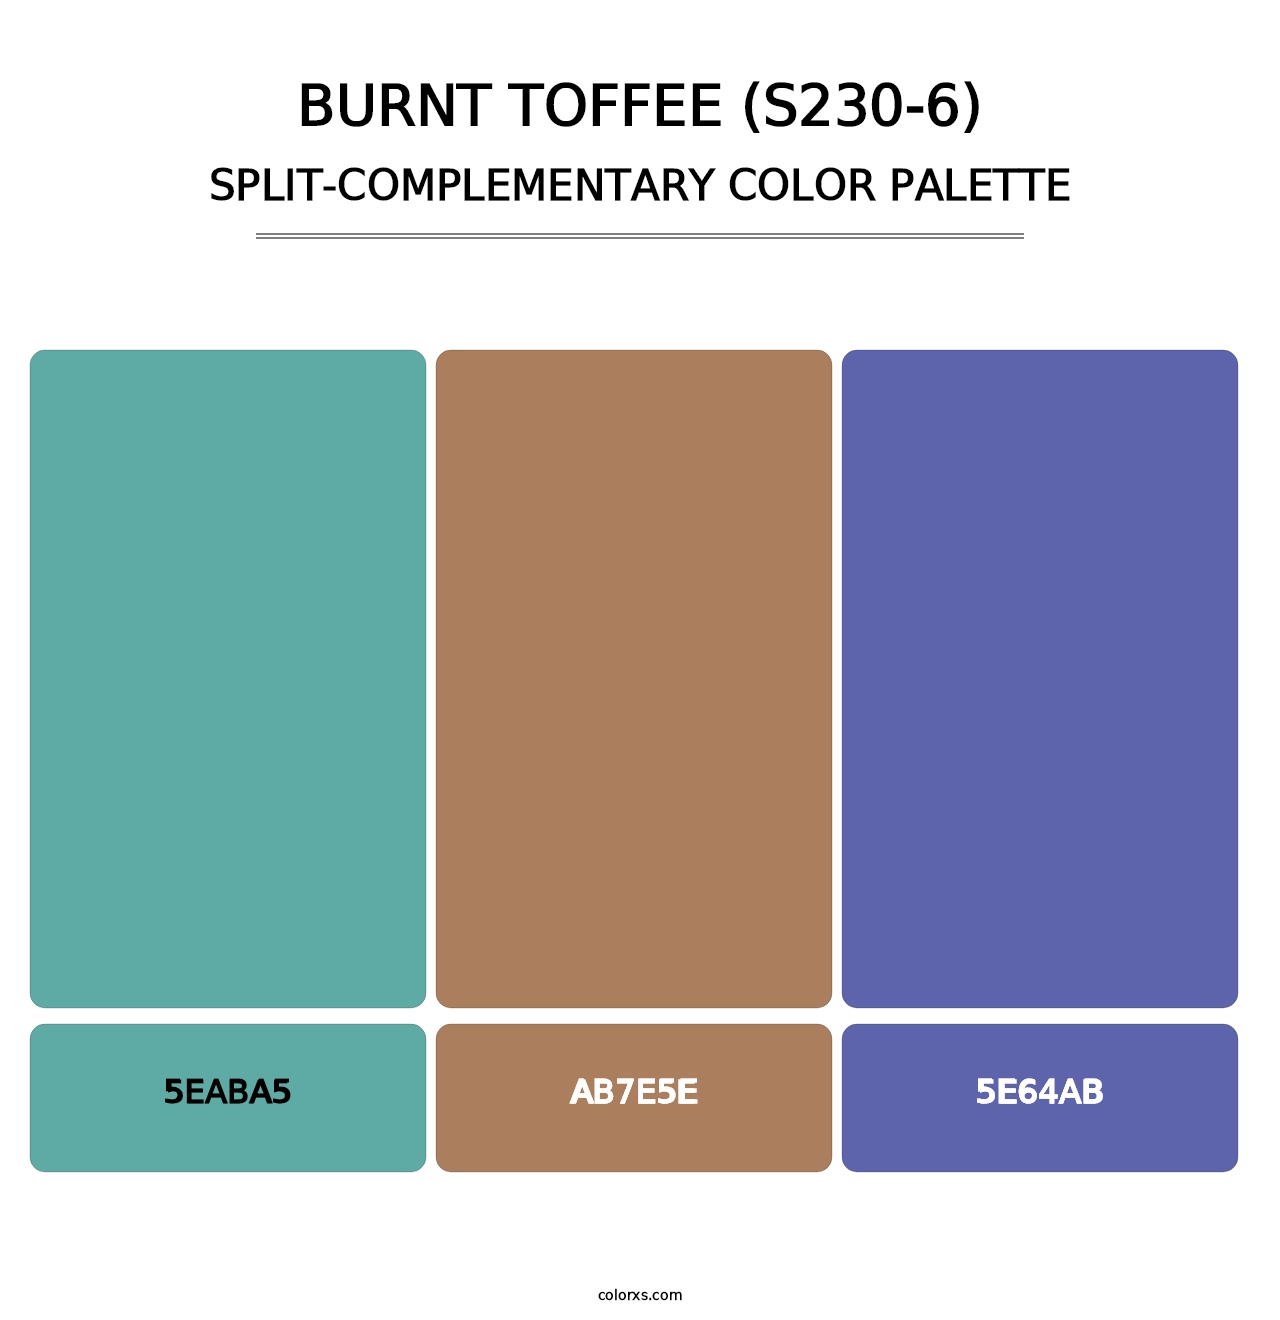 Burnt Toffee (S230-6) - Split-Complementary Color Palette